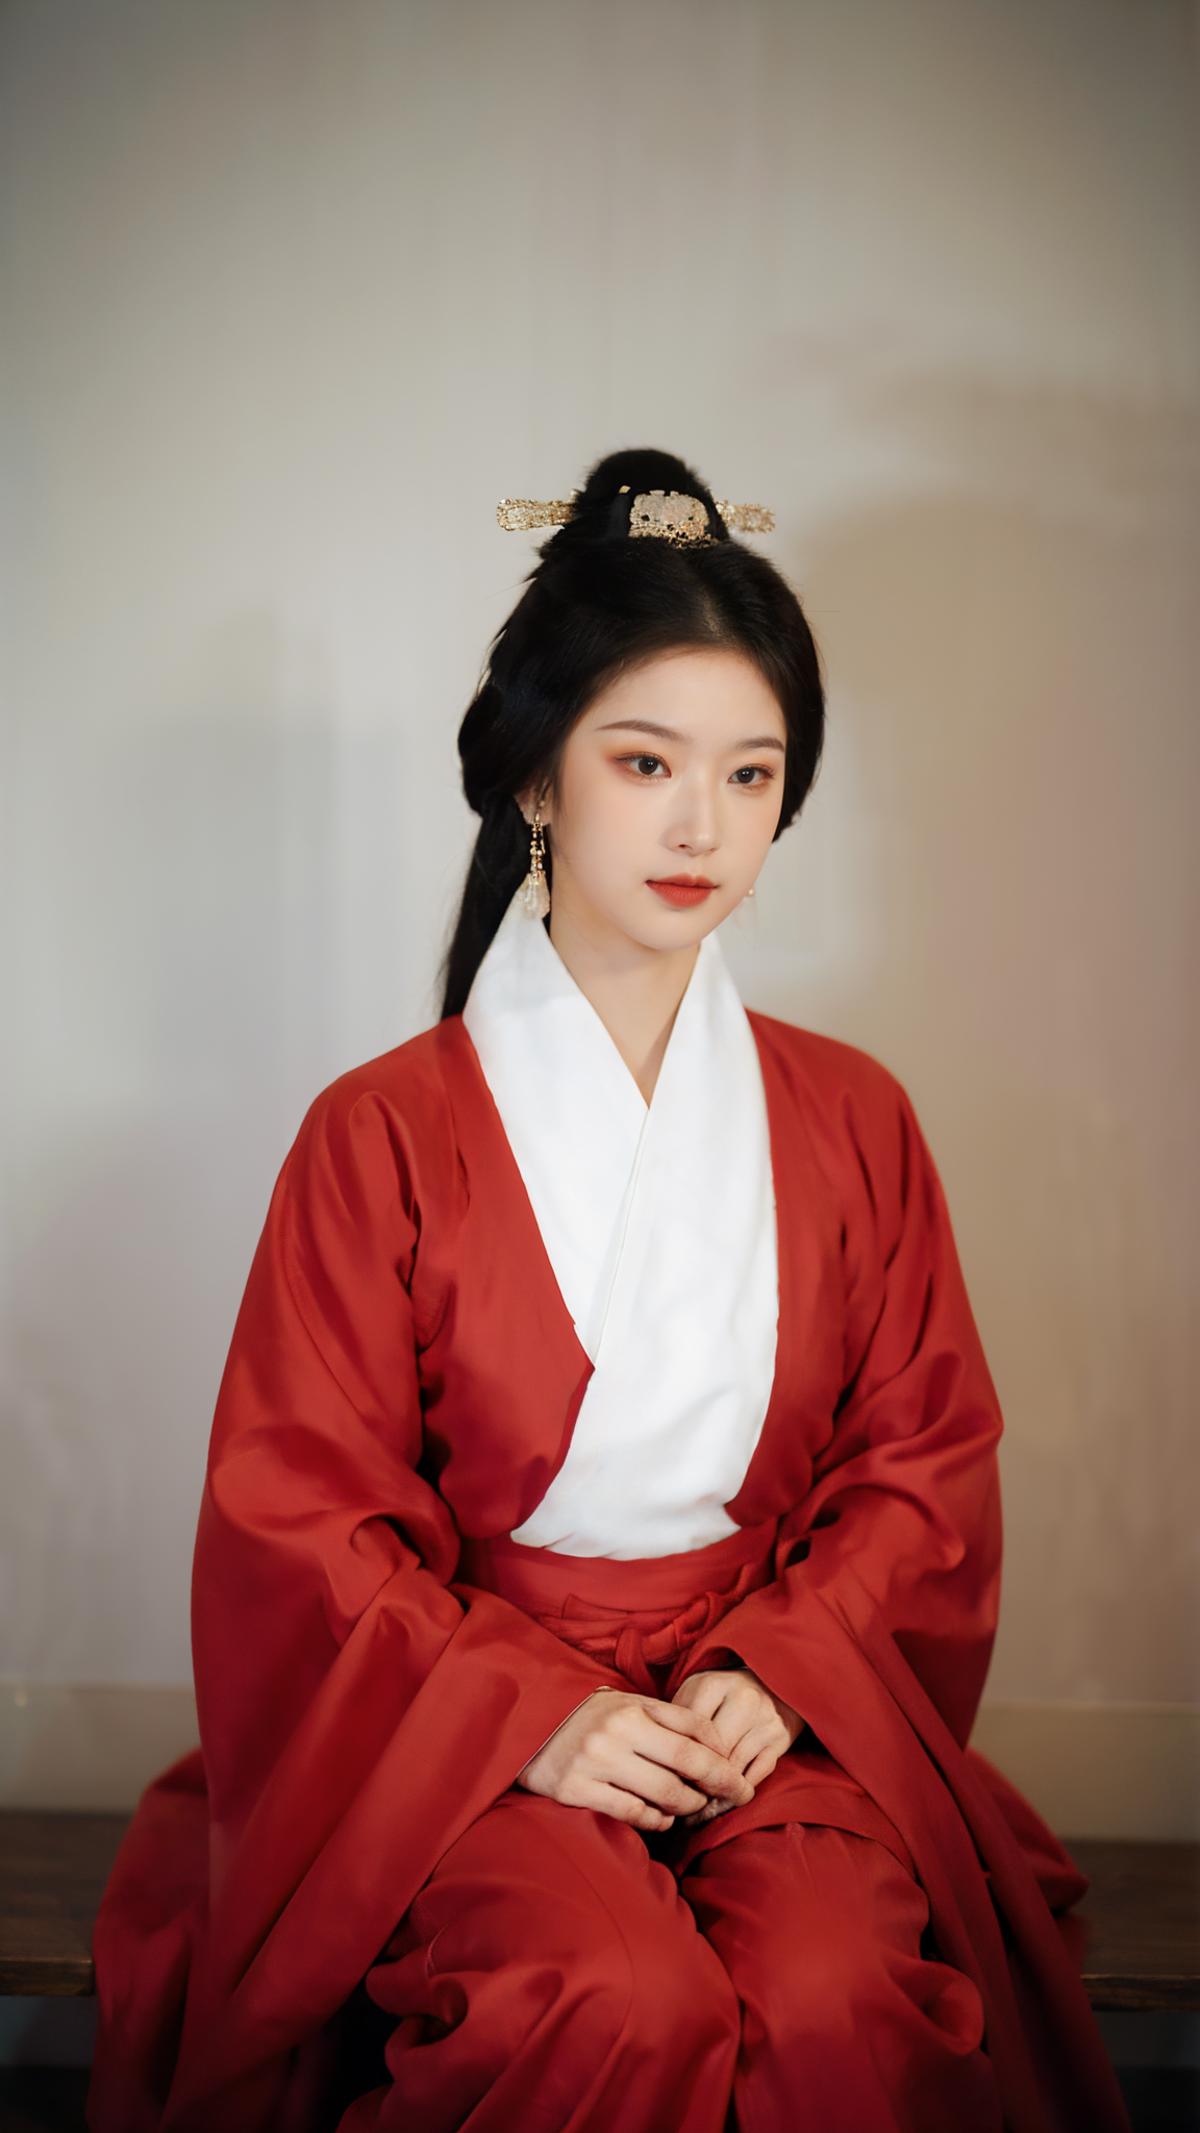 Clothing and makeup in the Qin and Han Dynasties-Classic red and white Hanfu || 秦汉时期的服饰与妆容- 经典红白汉服 image by Gostar